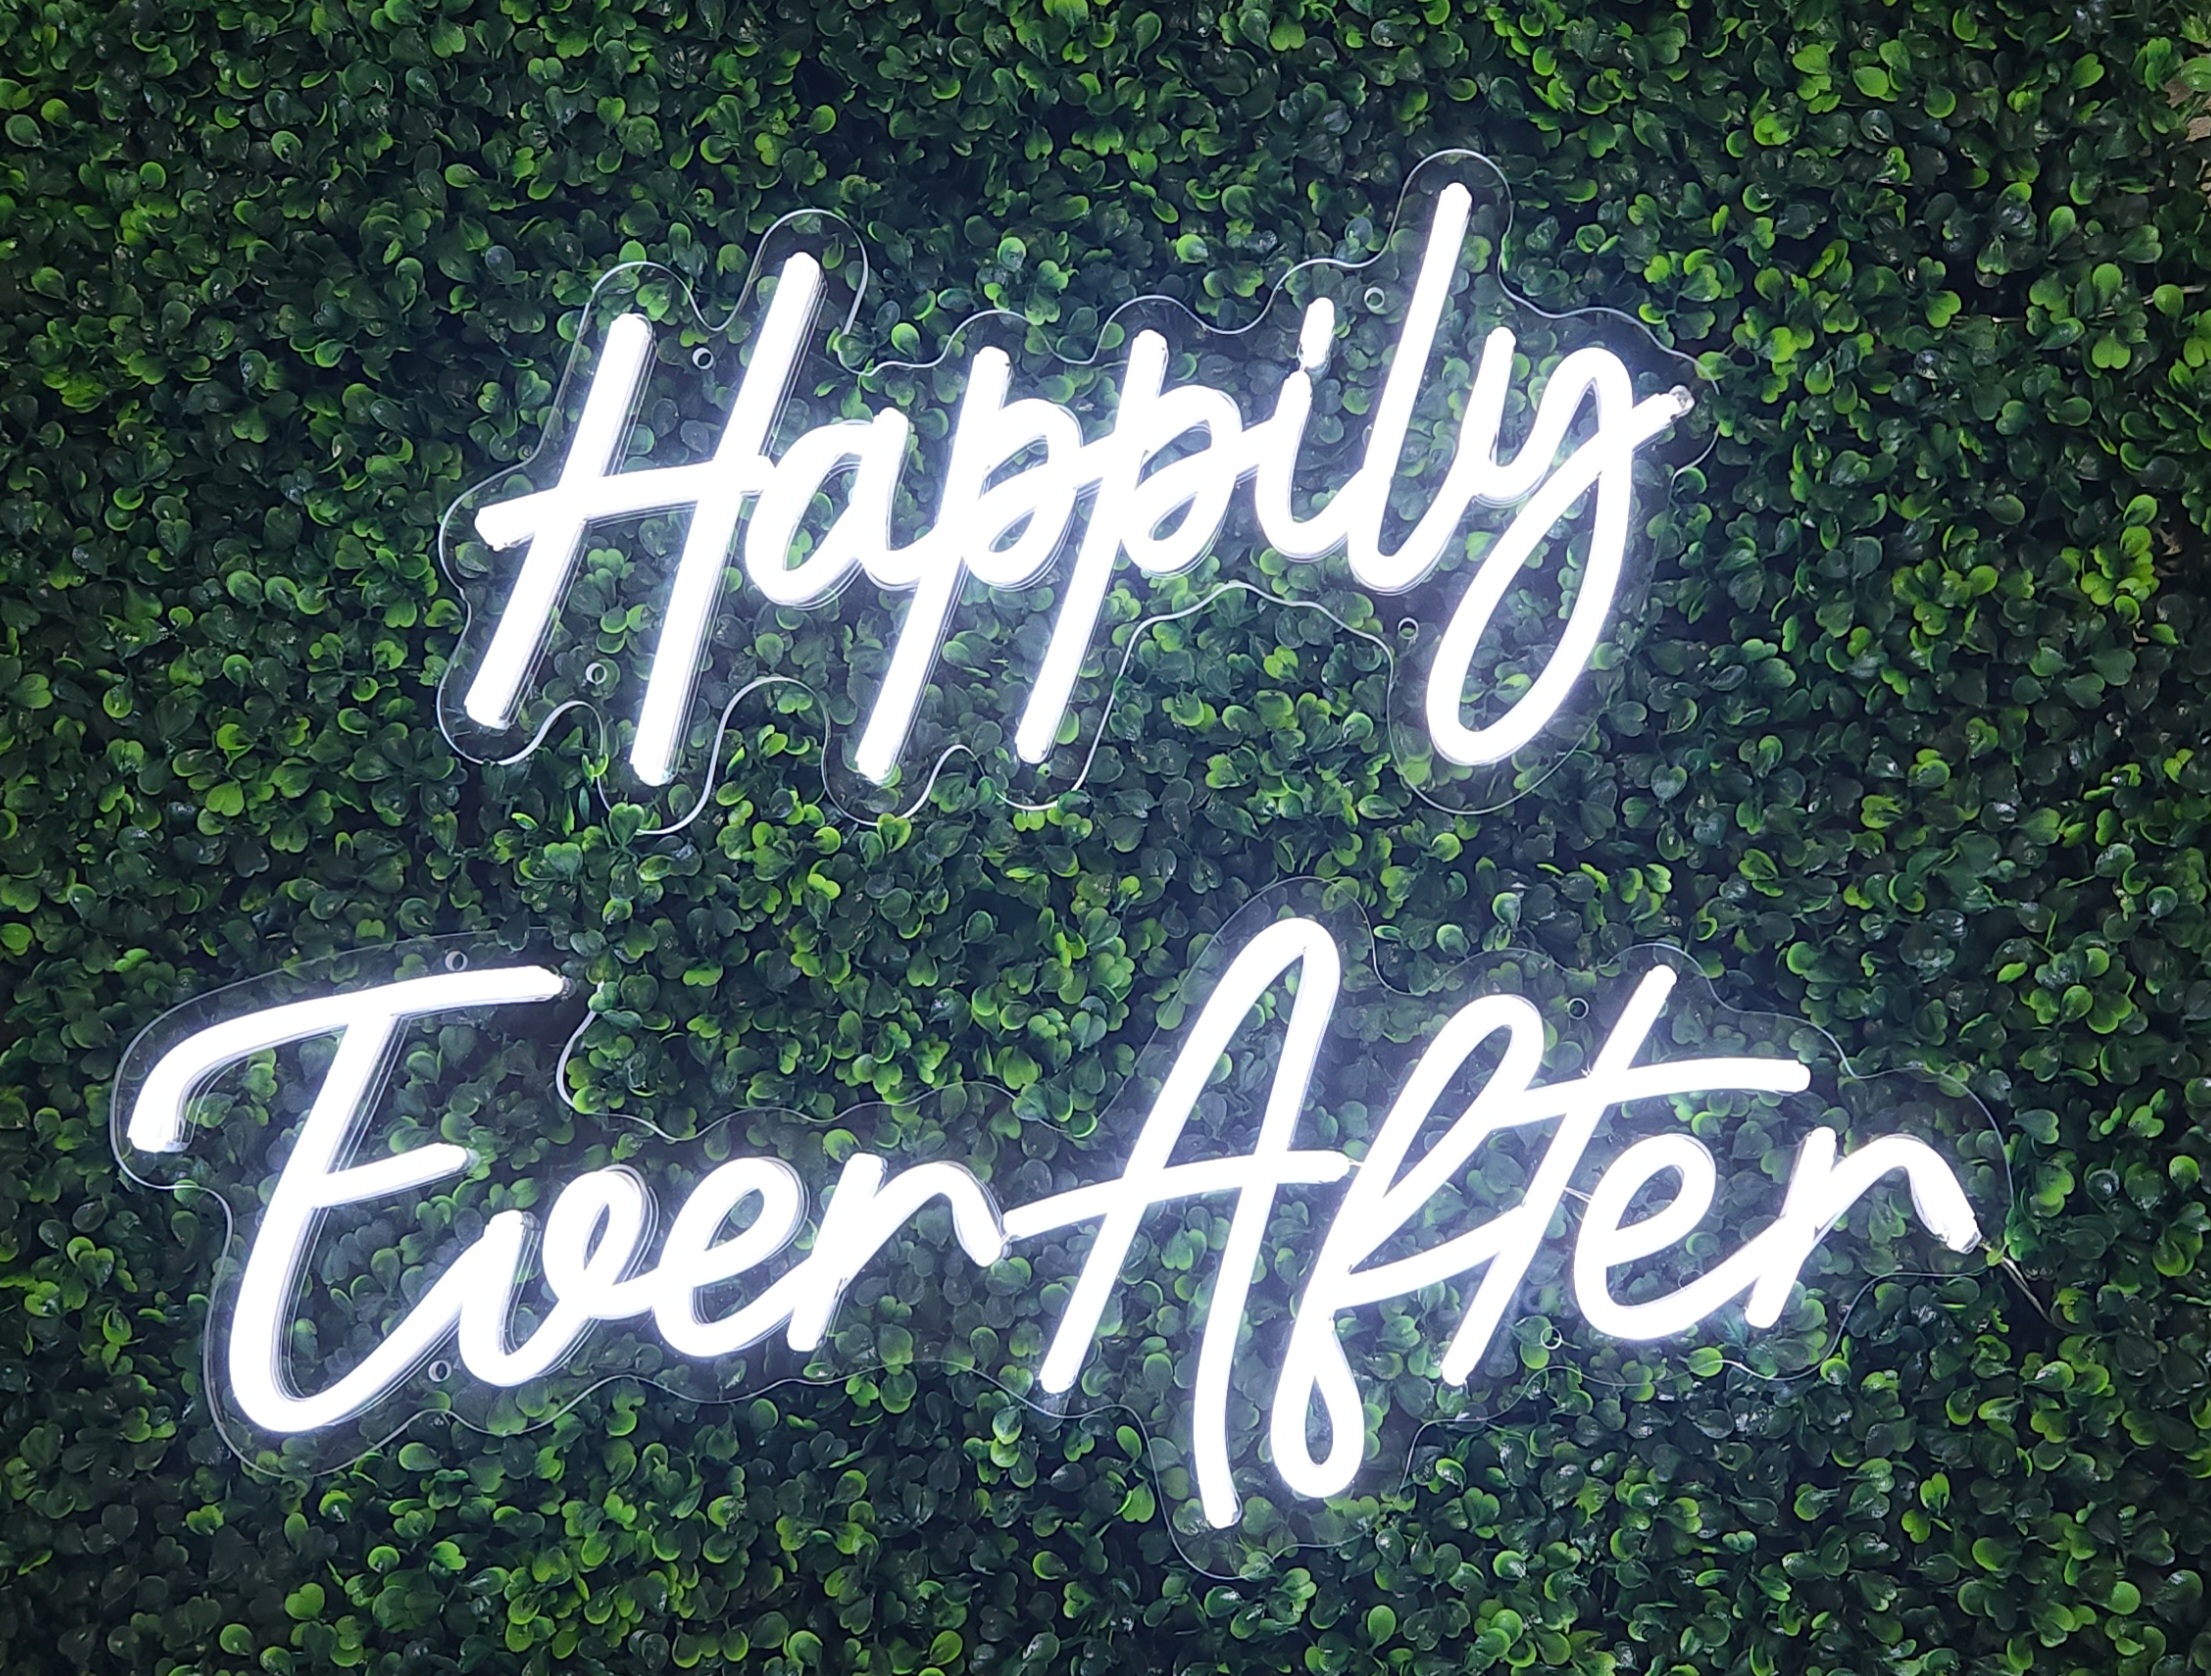 Happily ever after neon sign rental